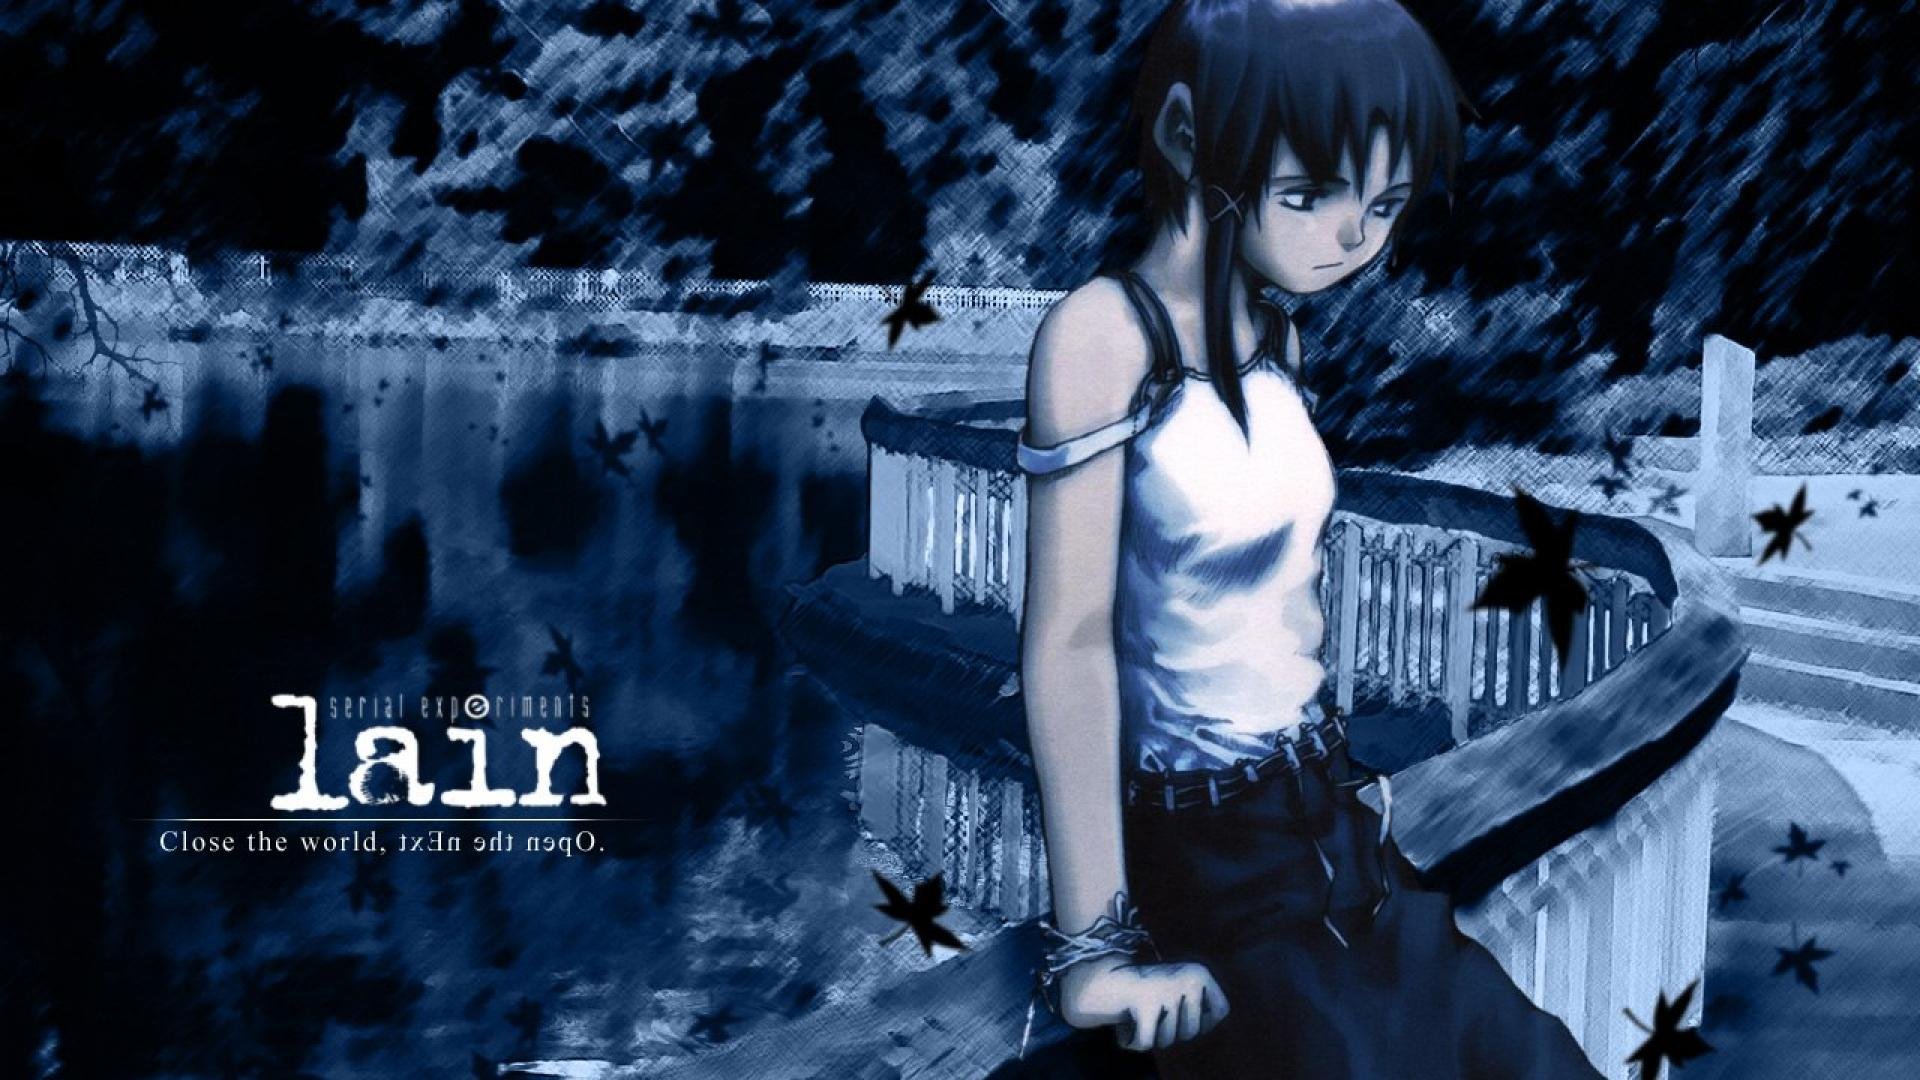 Serial Experiments Lain Anime Series Cyberpunk Horror Sci Fi Drama 1sel Wallpapers Hd Desktop And Mobile Backgrounds